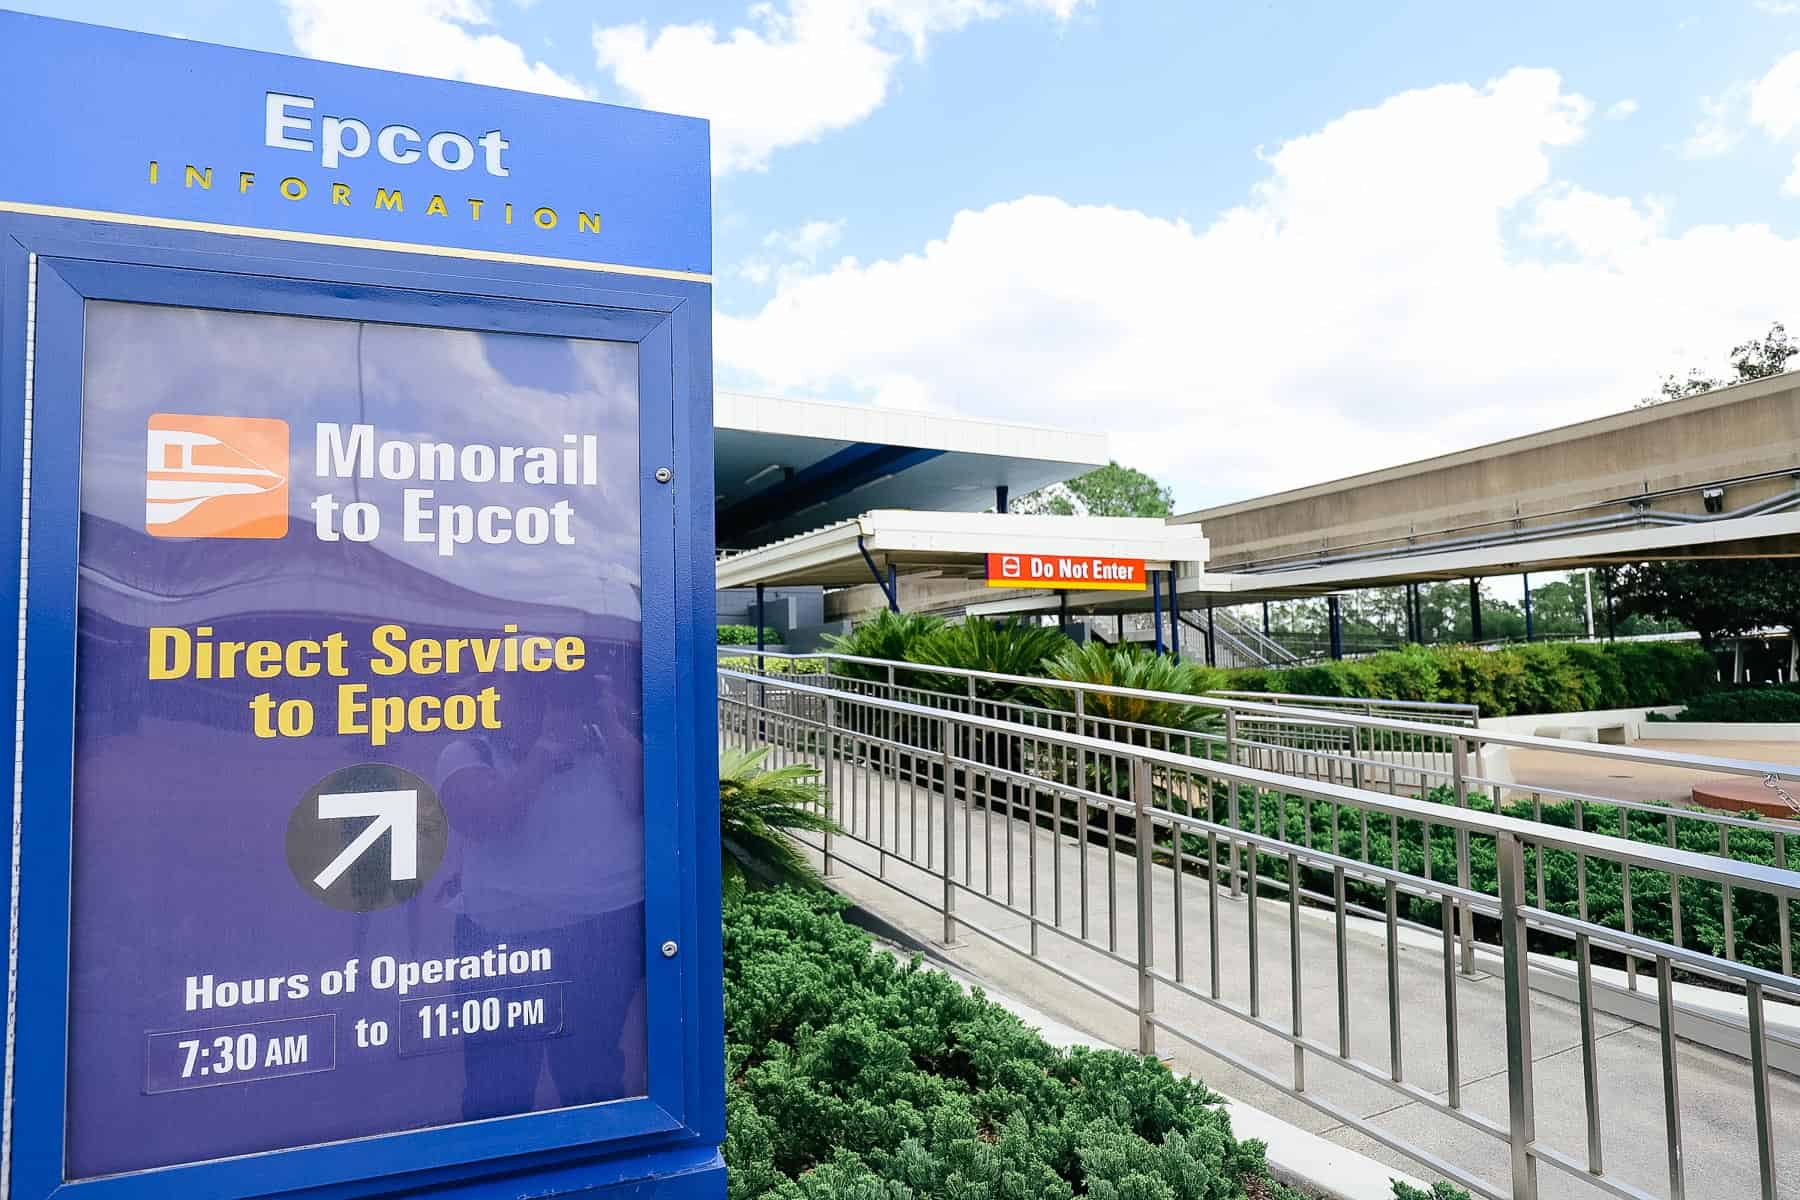 Posted hours for the monorail to Epcot 